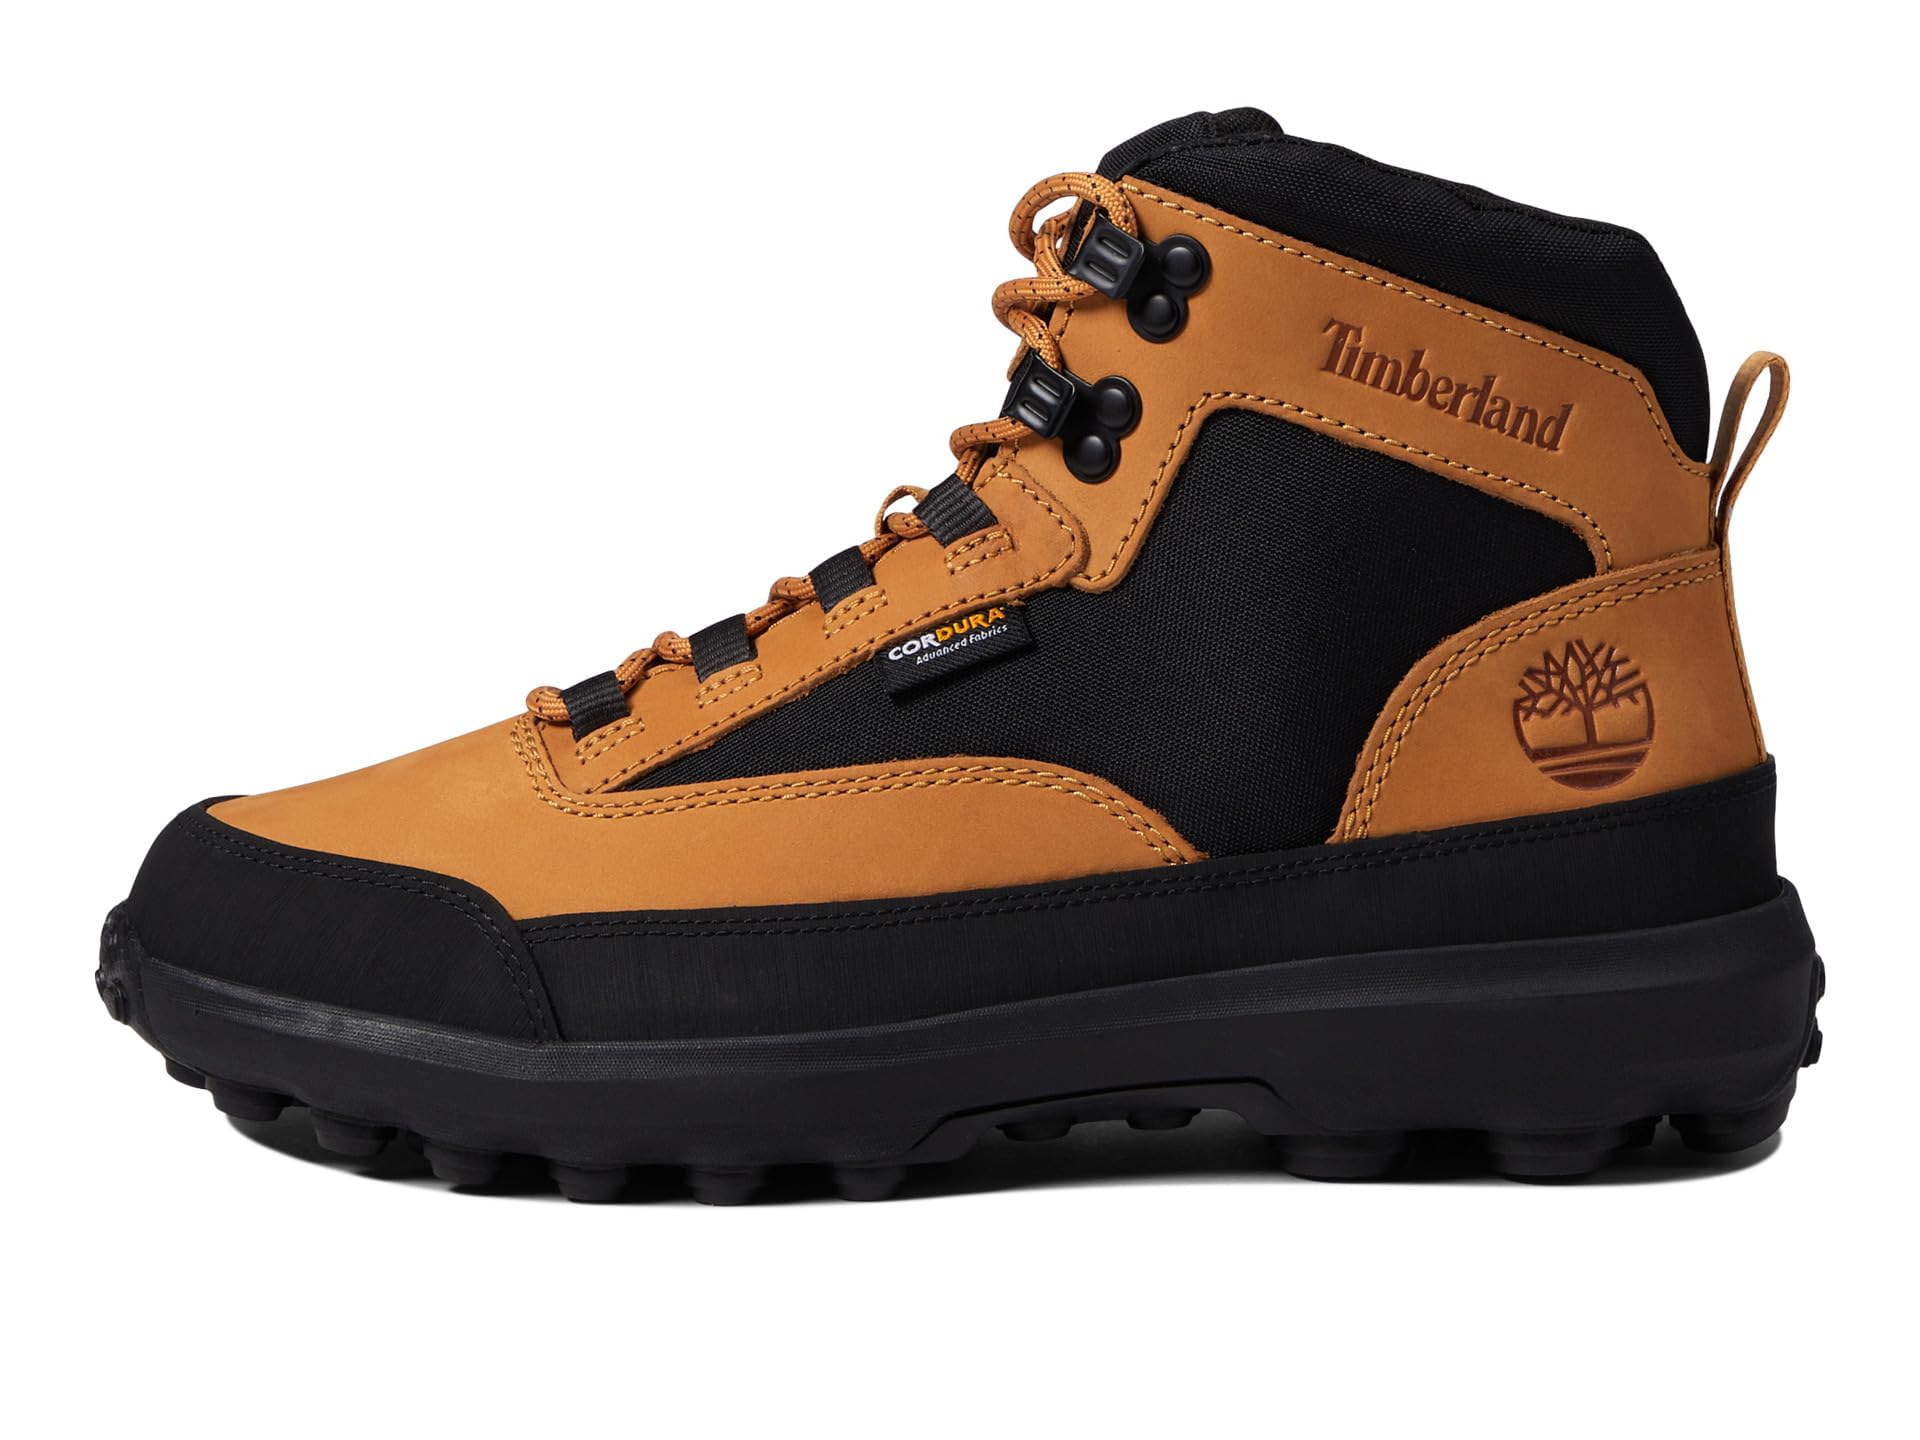 Timberland Men's Converge Mid Lace Up Boot